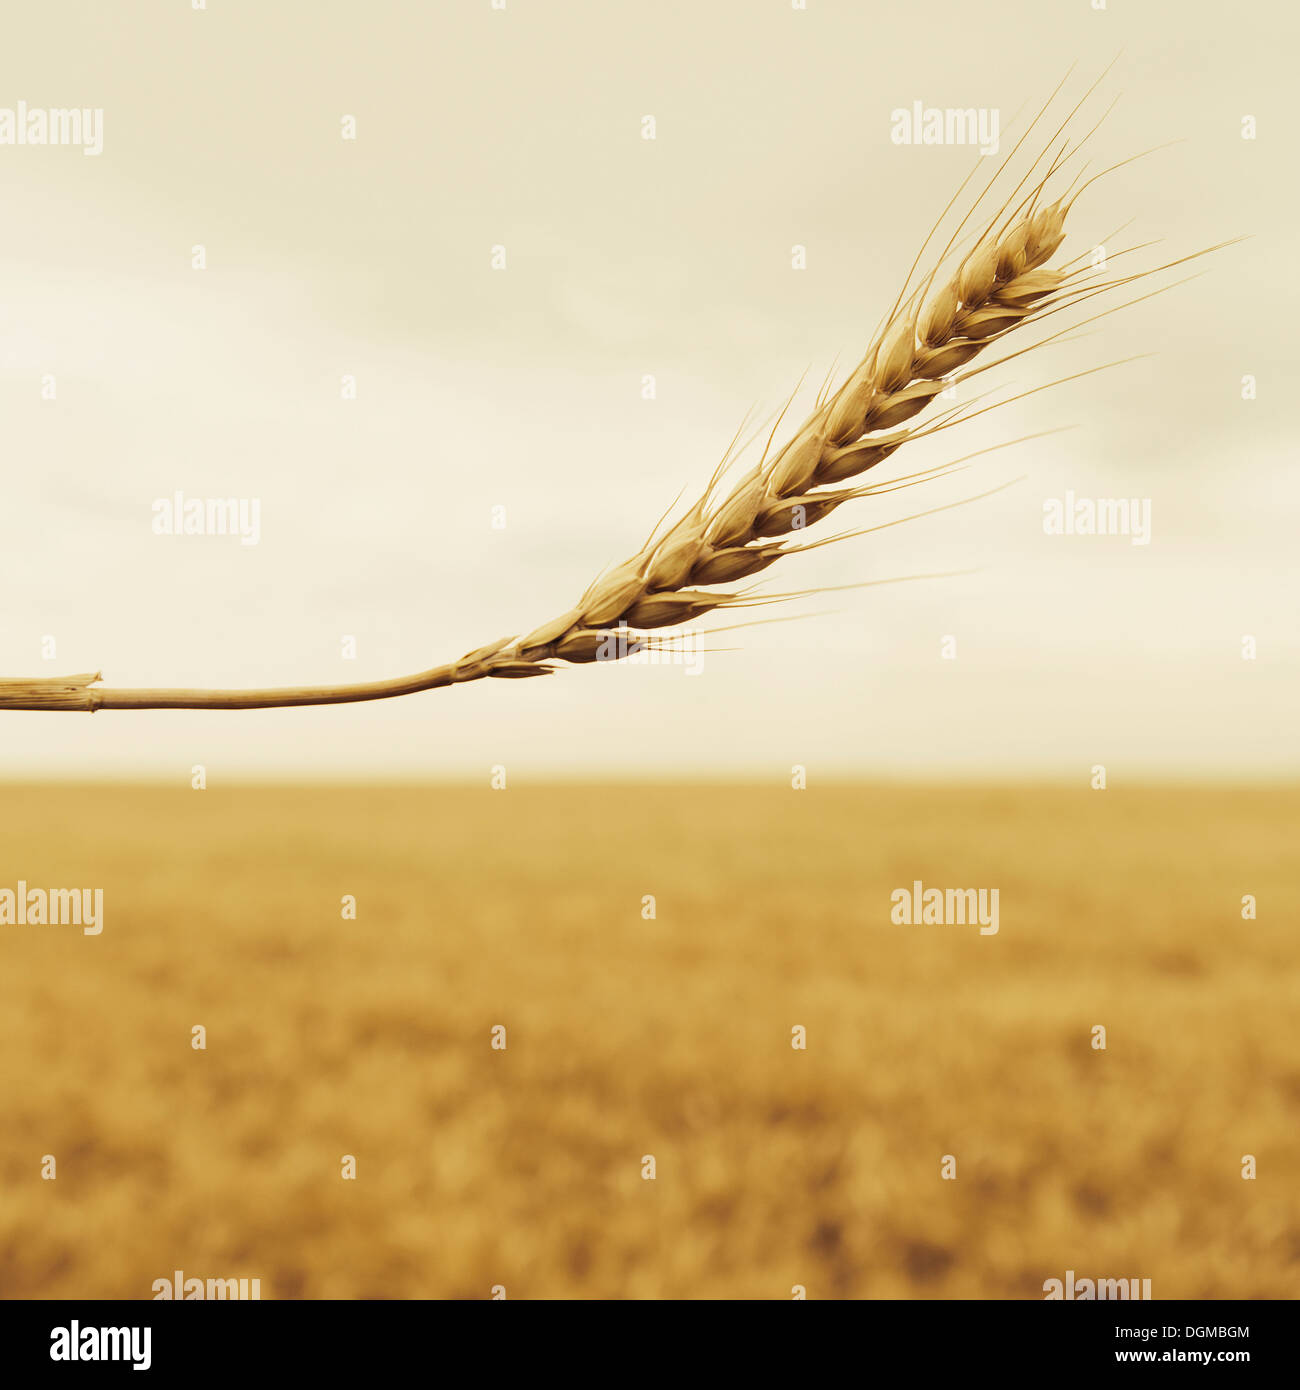 A stalk of wheat with a ripening ear at the top. Crop field. Stock Photo